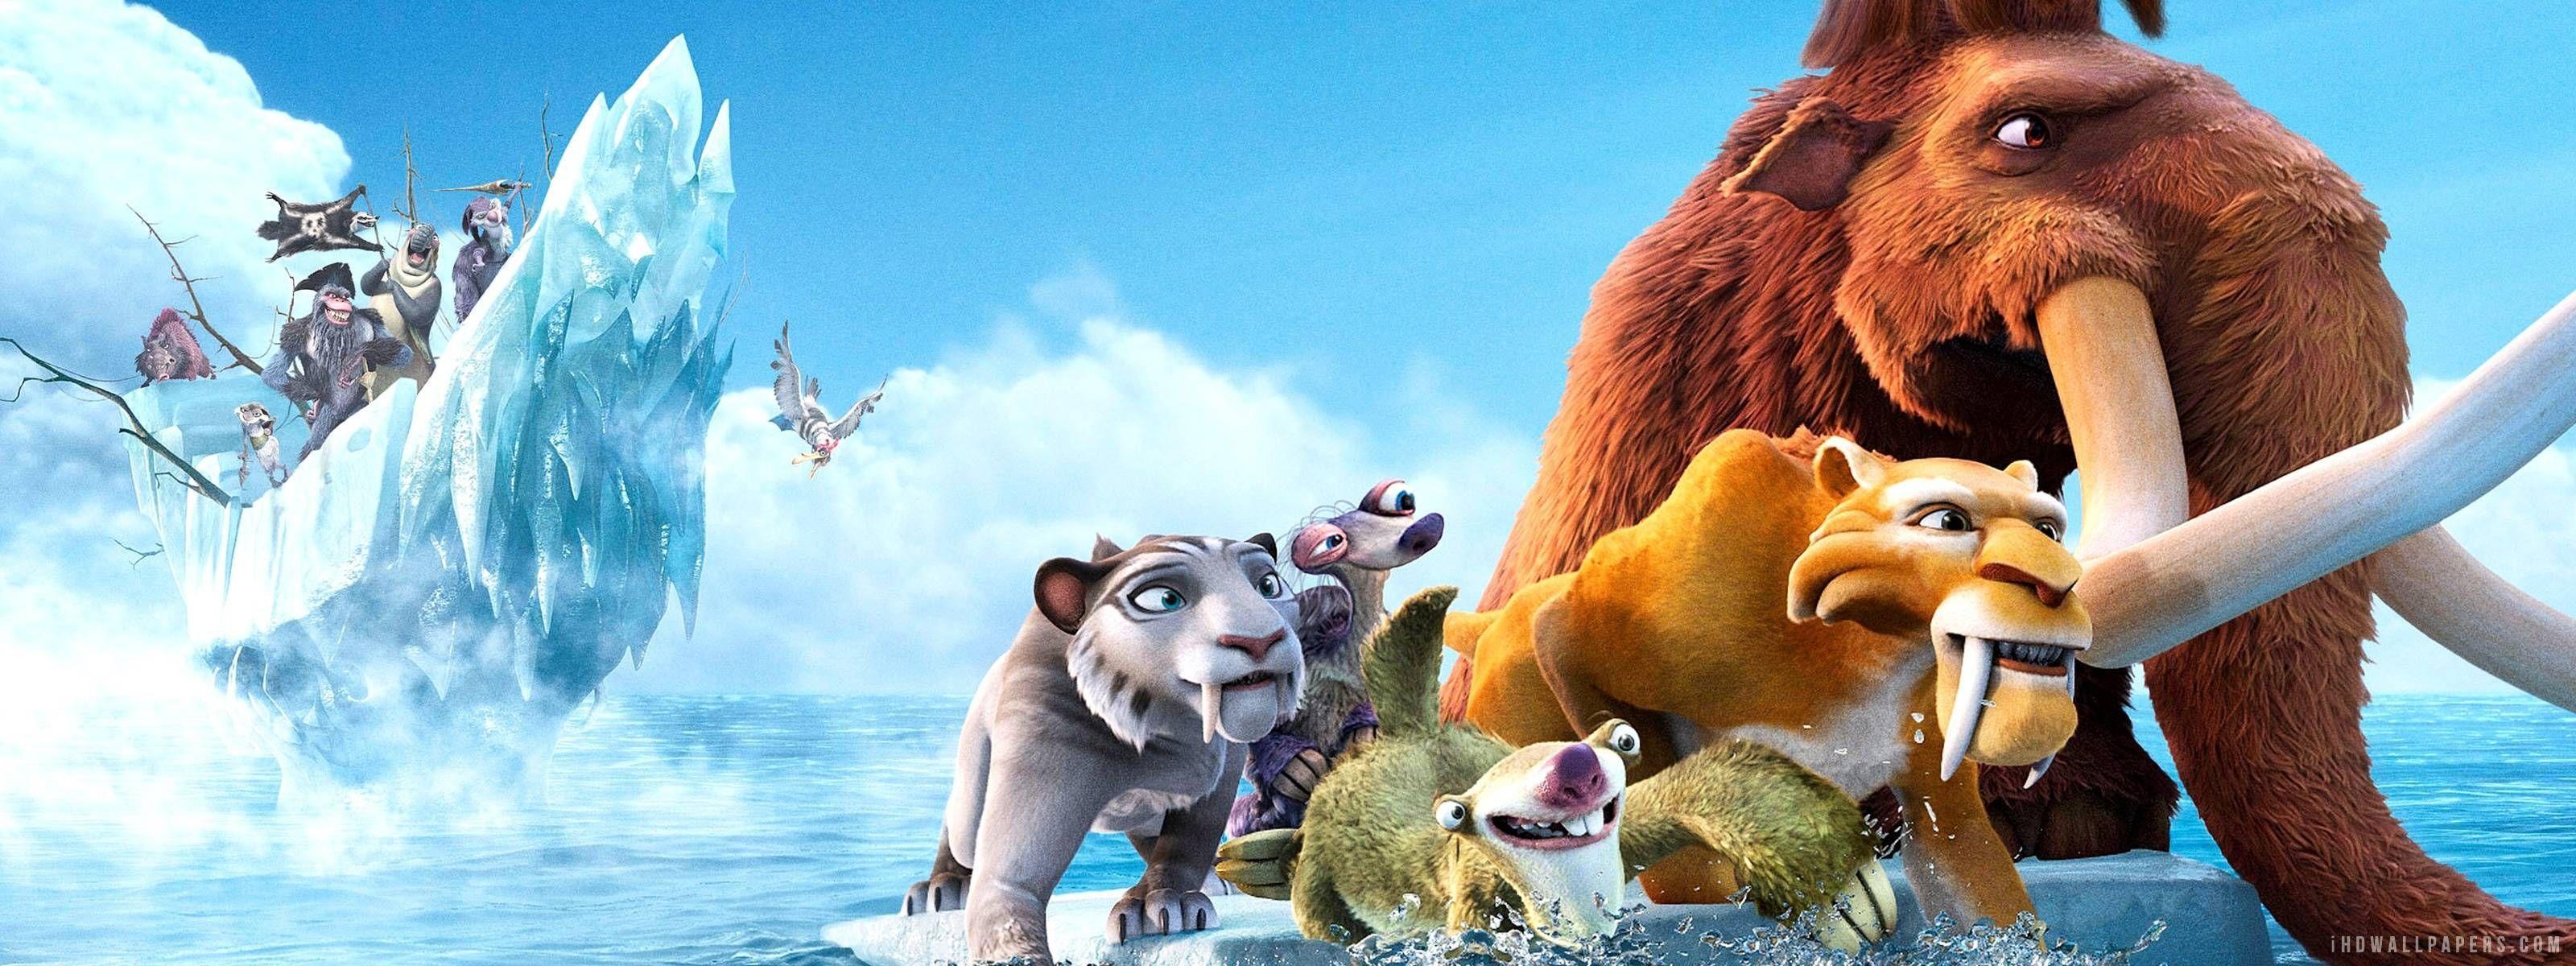 Download Free Ice Age Wallpaper 3200x1200 HD Wall. Epic Car